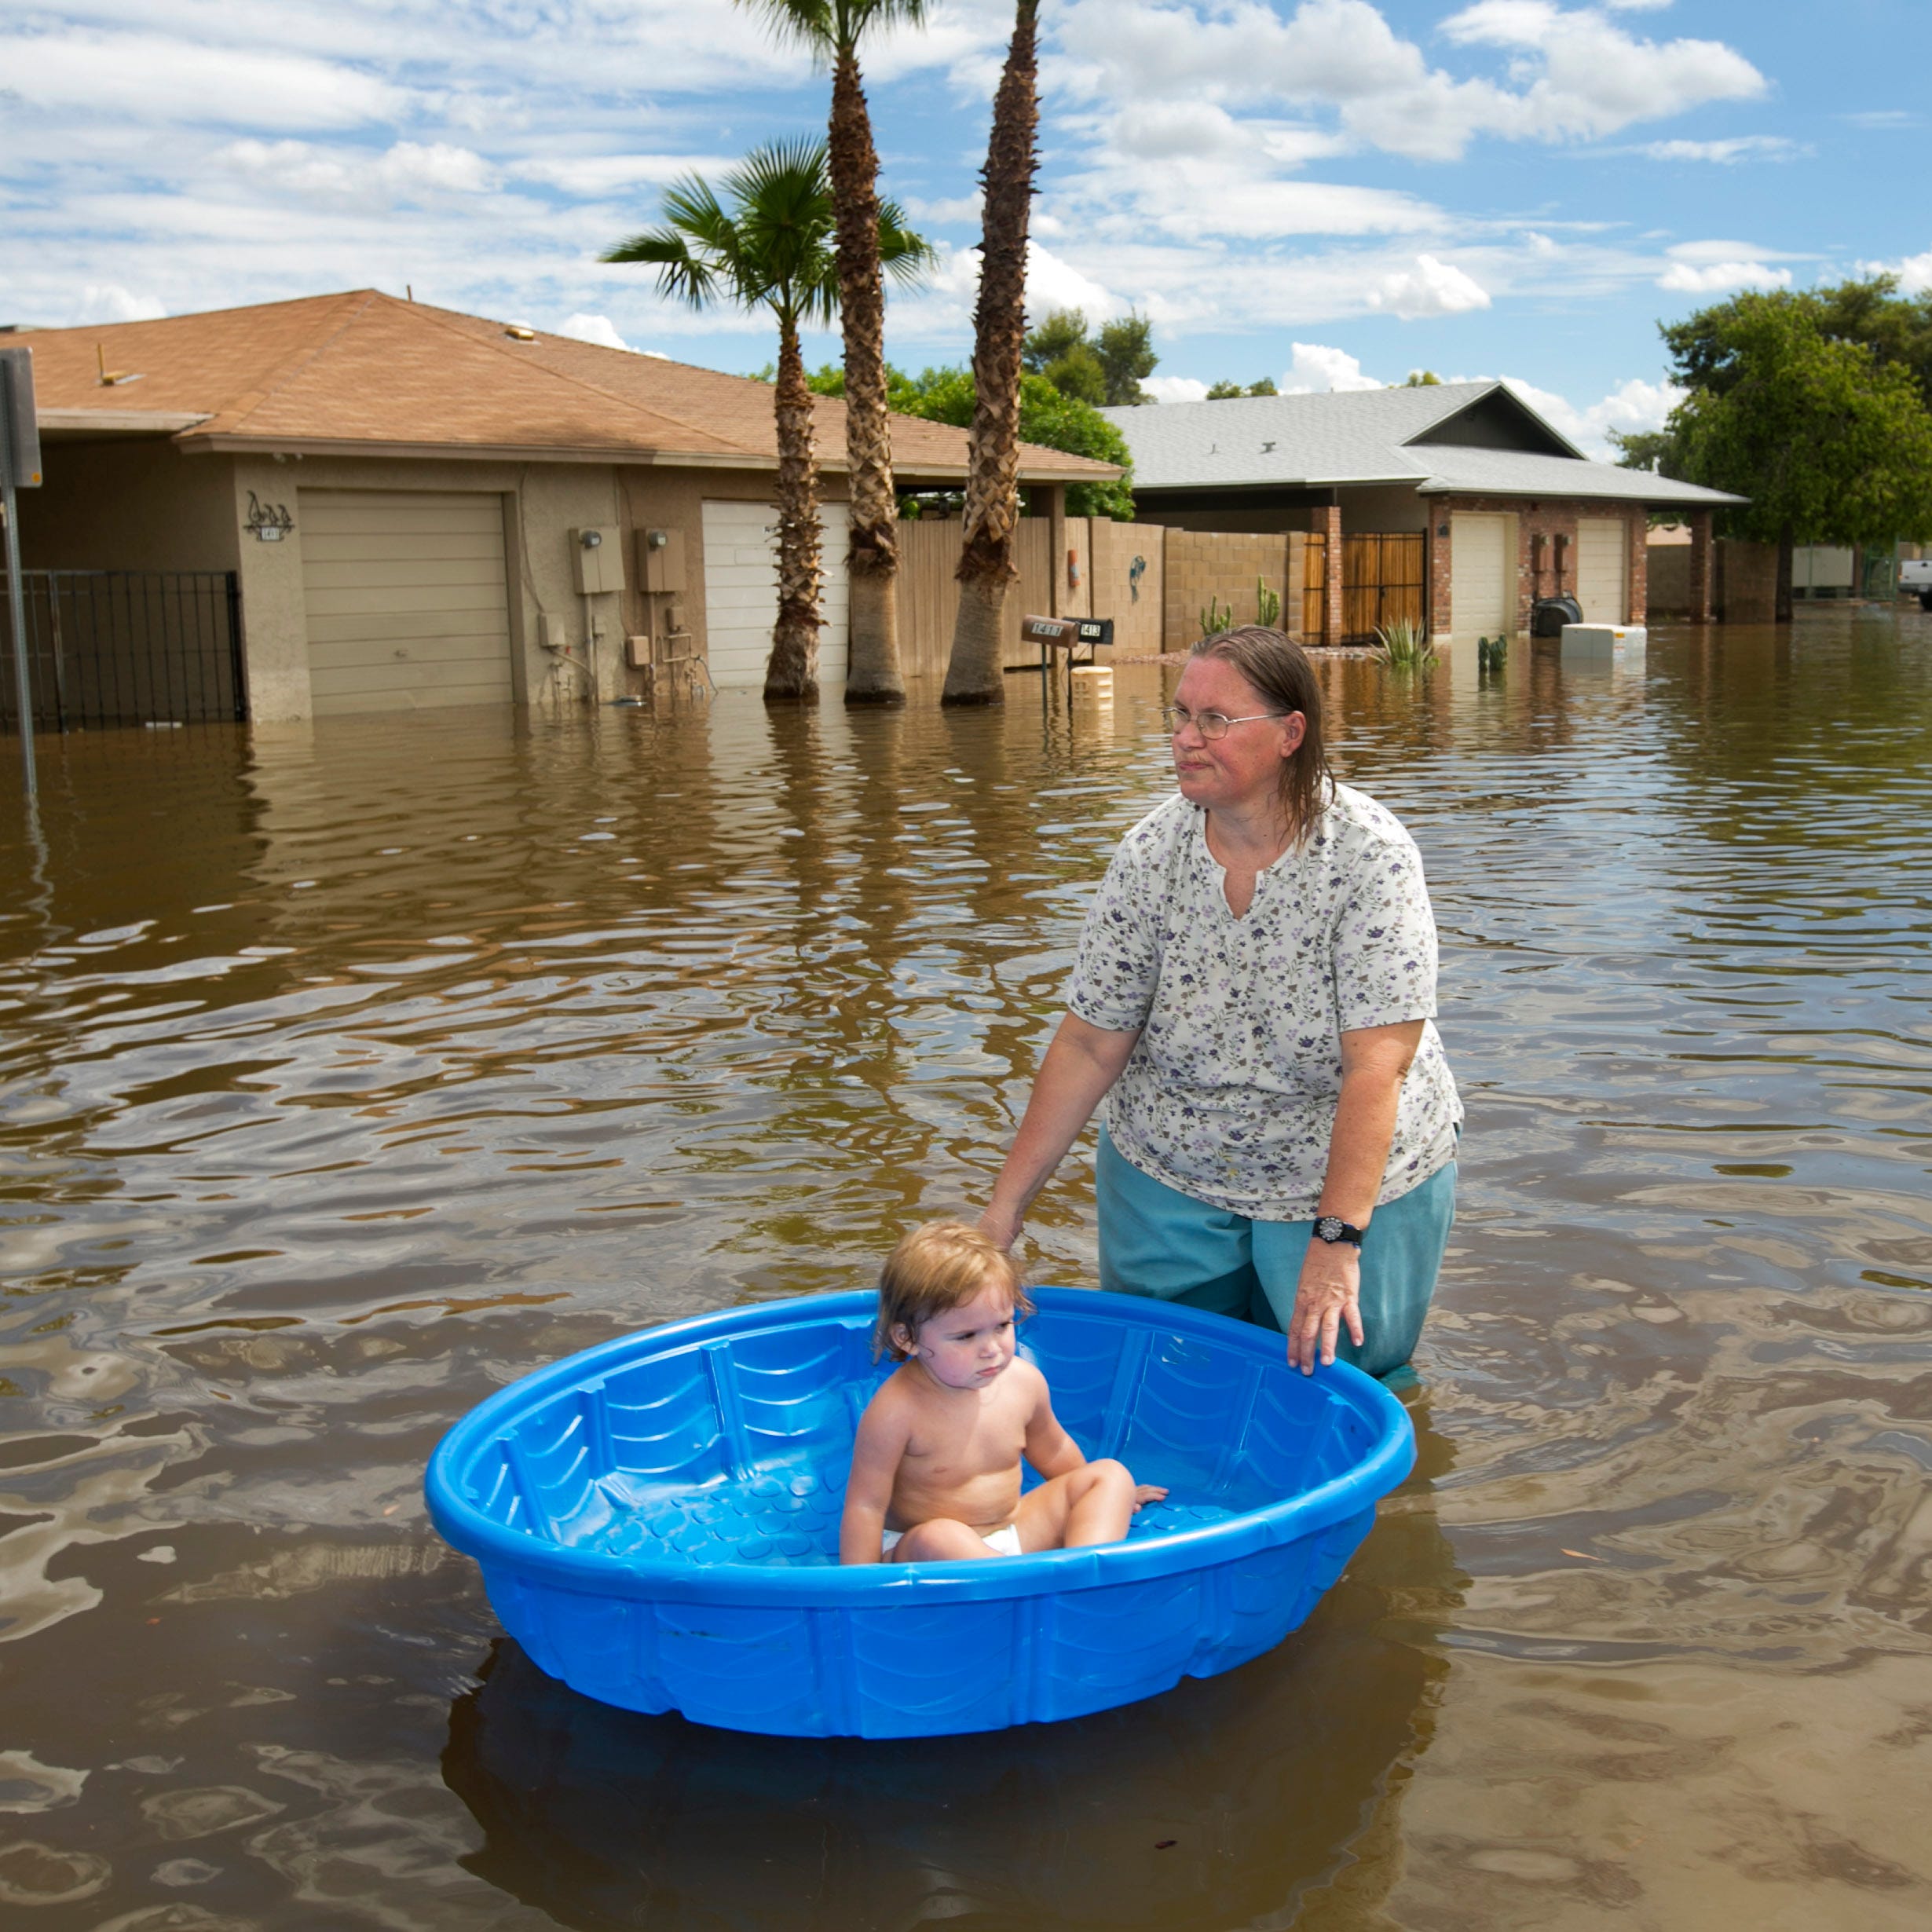 Laura Moravek carries her granddaughter, Alyssa Guarino, in a pool as they walk through the flooded road of South Allen, just east of Stapley Drive in Mesa on Tuesday, September 9, 2014.